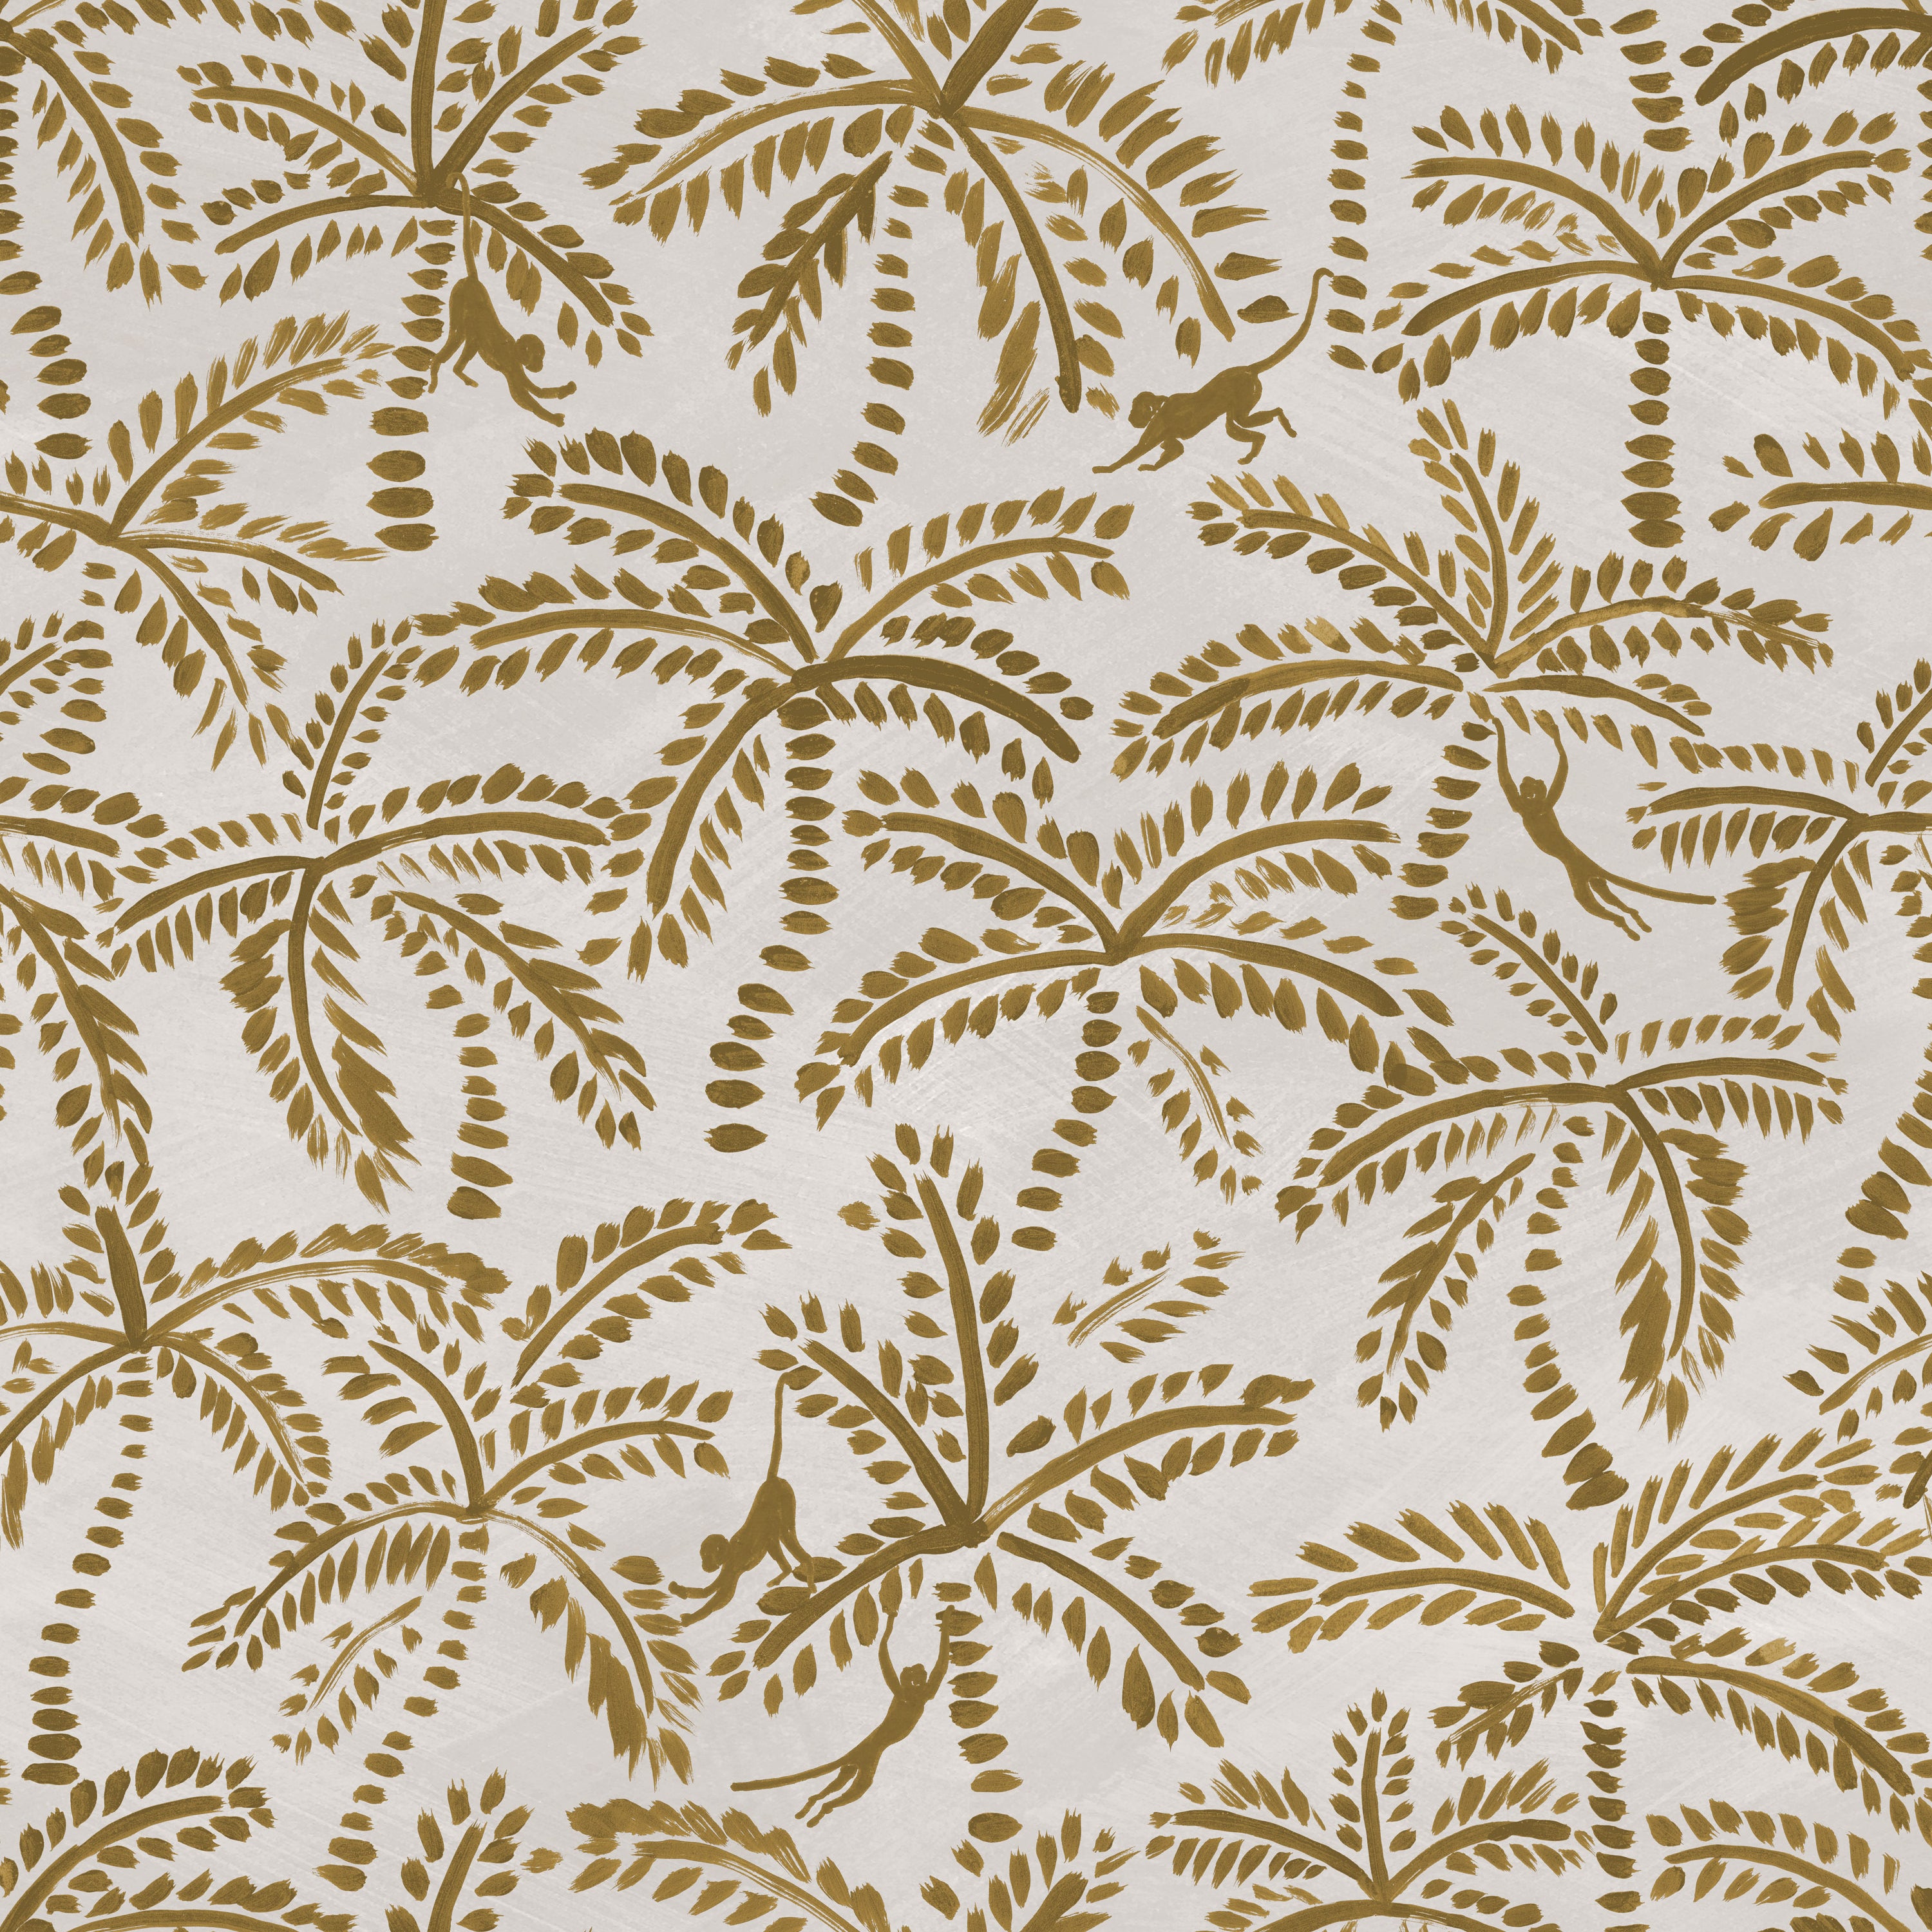 Detail of wallpaper in a playful palm tree and monkey print in gold on a cream field.